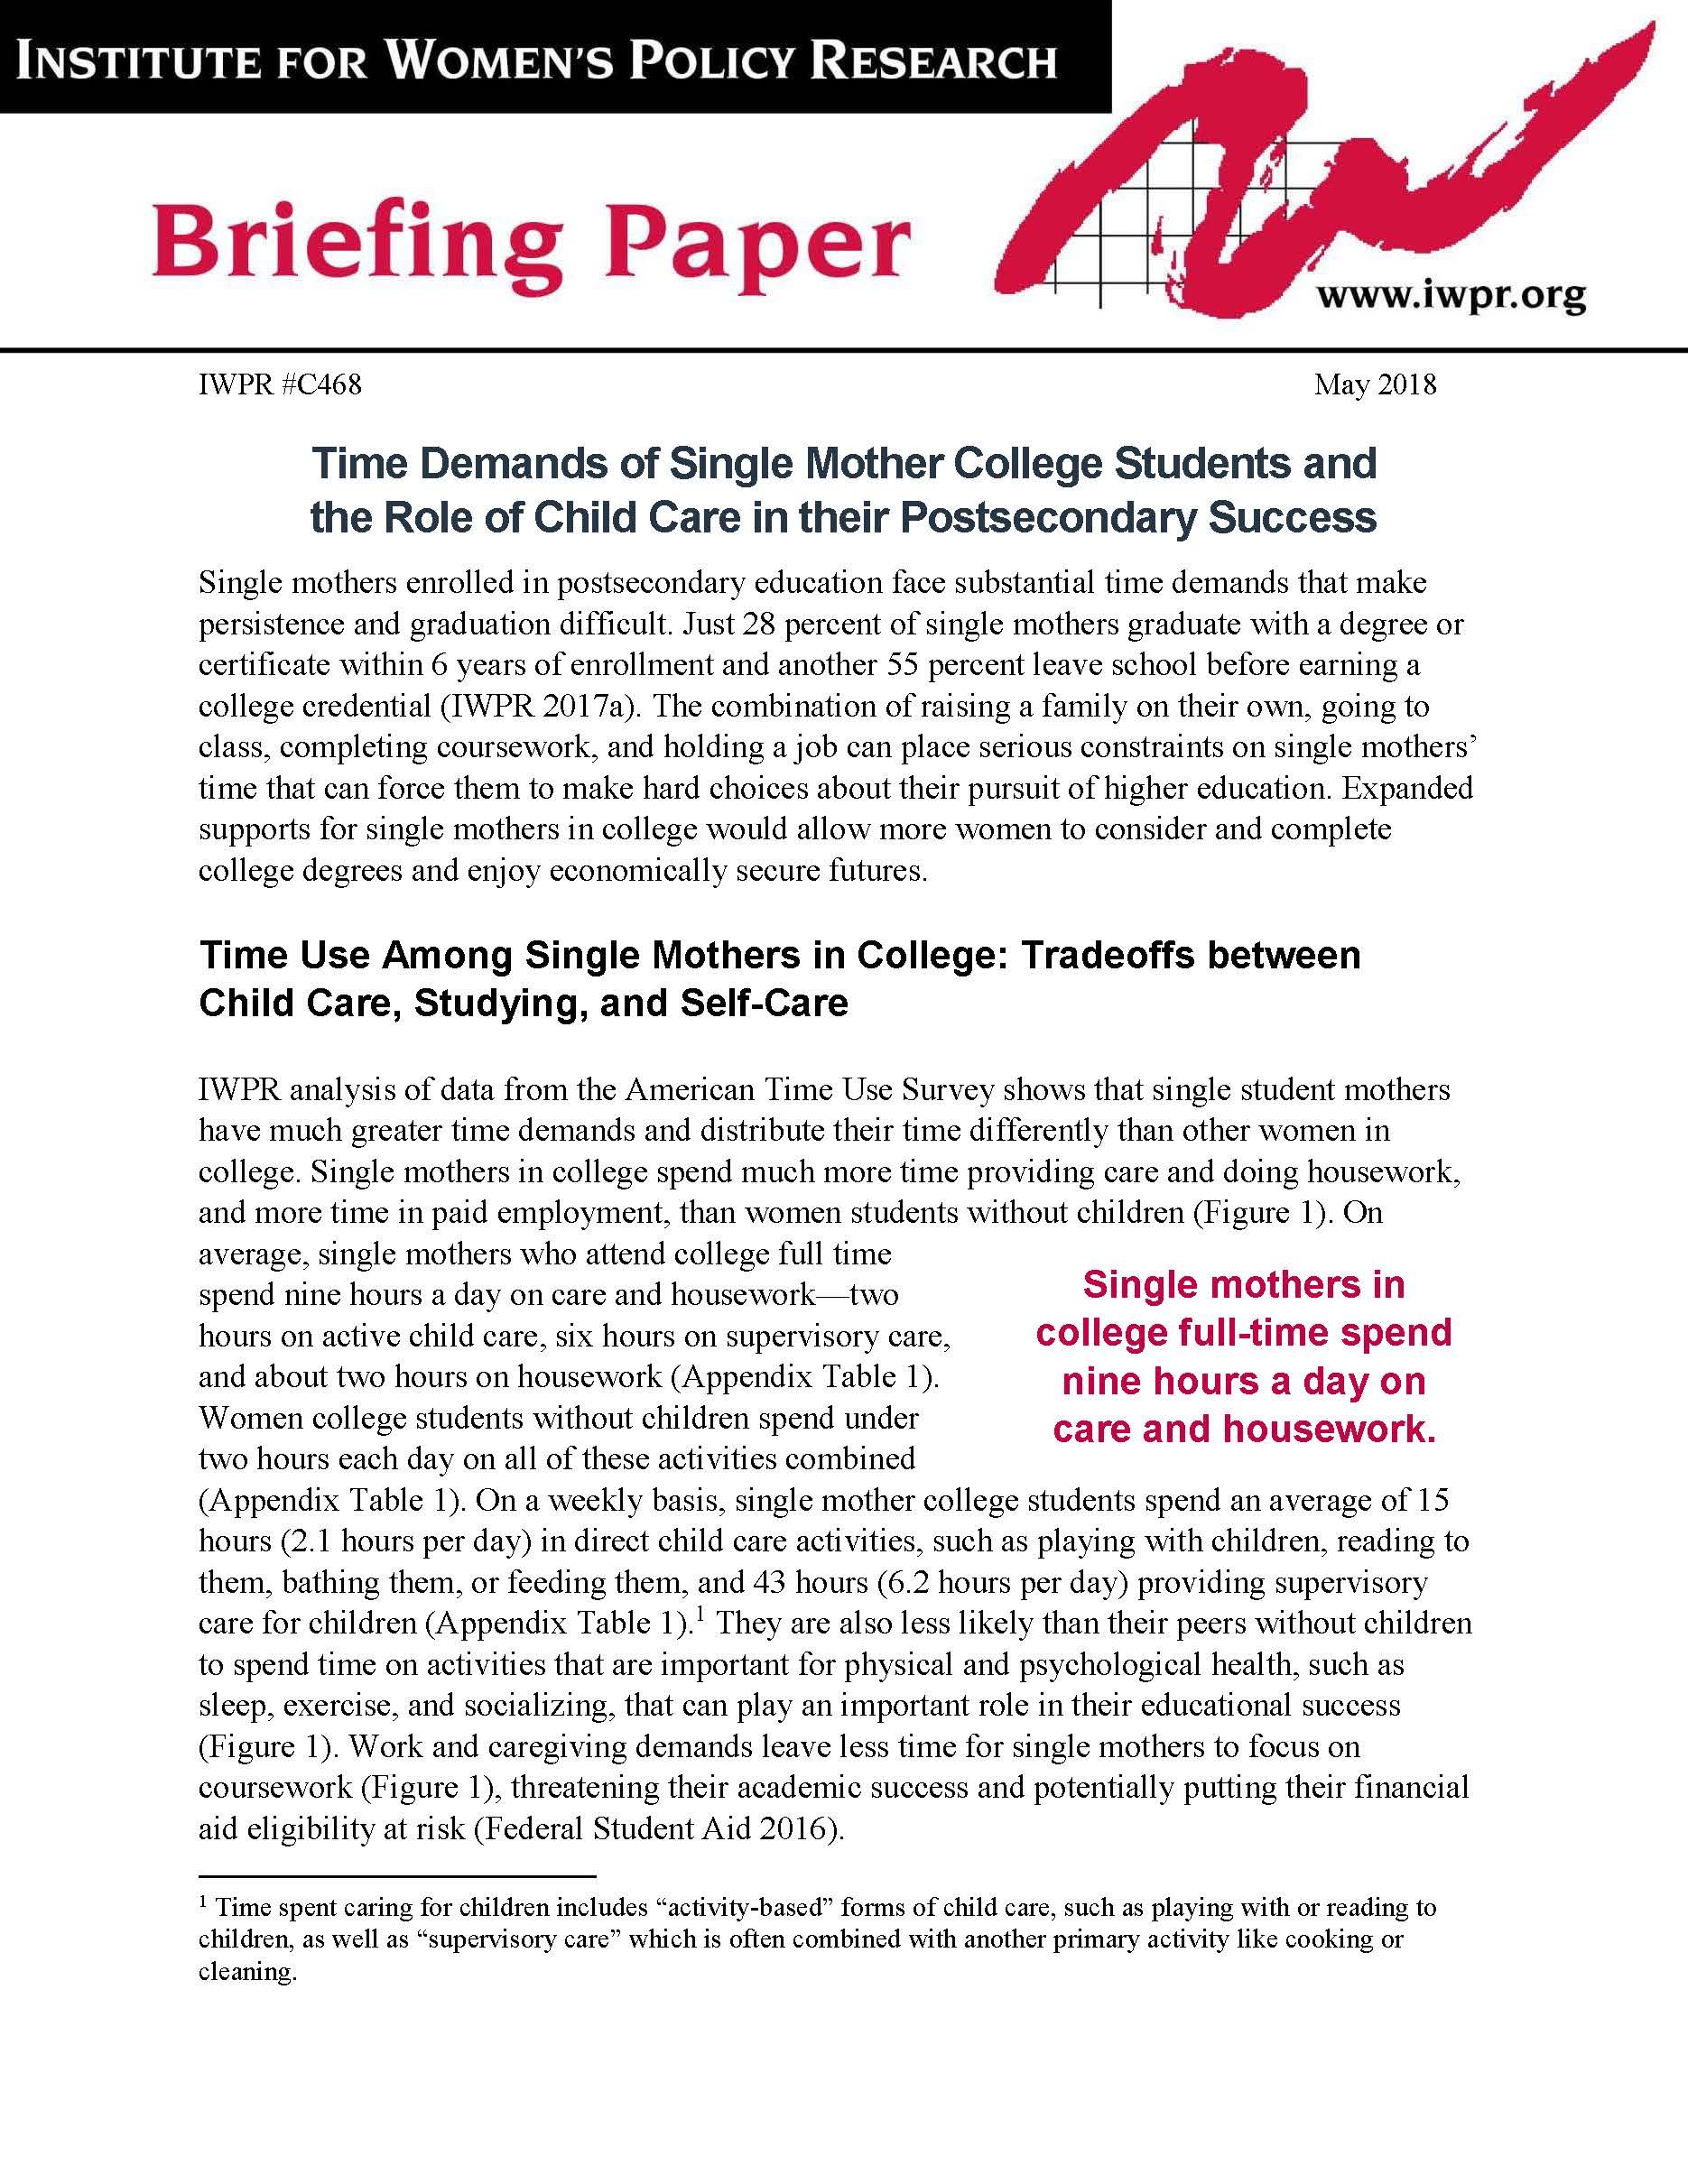 Time Demands of Single Mother College Students and the Role of Childcare in their Postsecondary Success